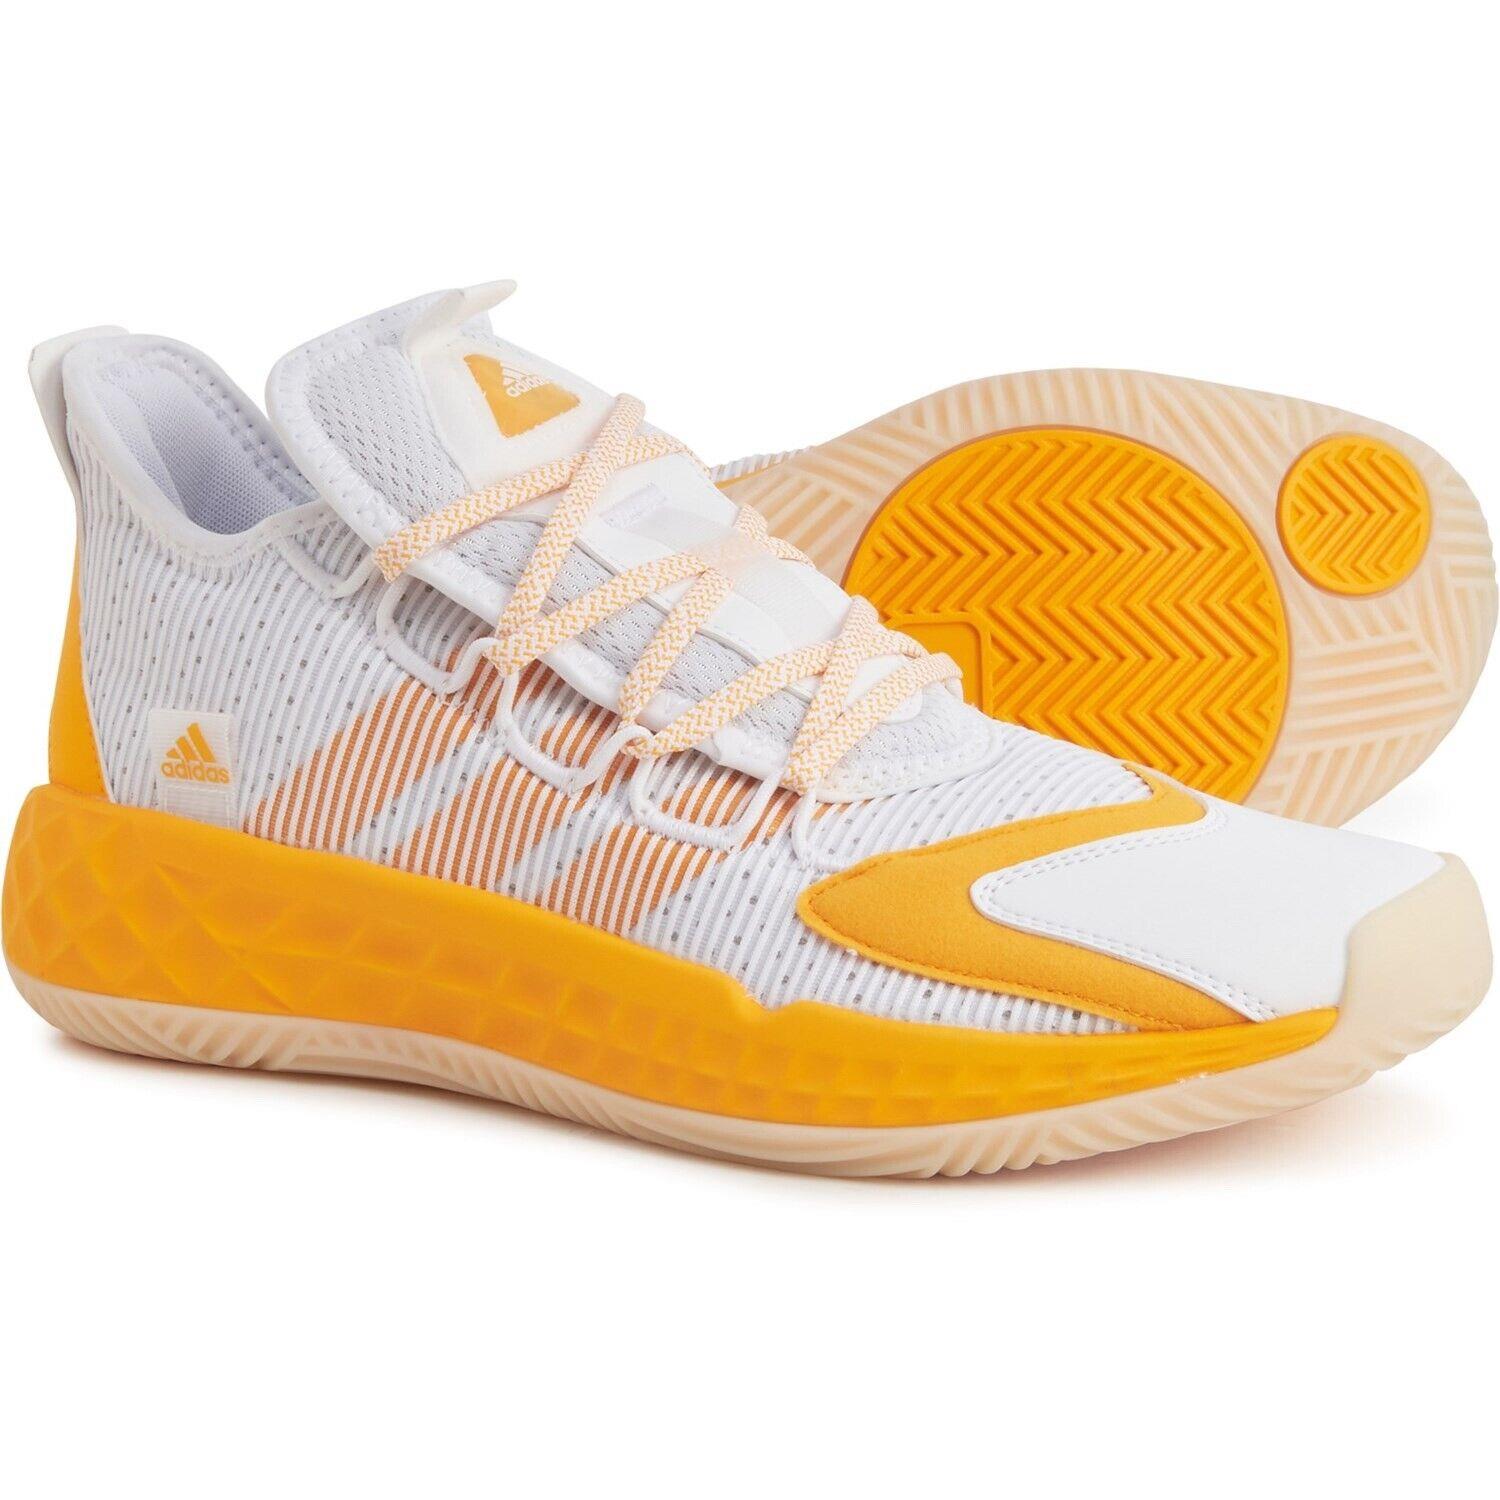 Adidas Pro Boost Low White Golden Yellow 14 FX9214 Mens Basketball Shoes Low Top